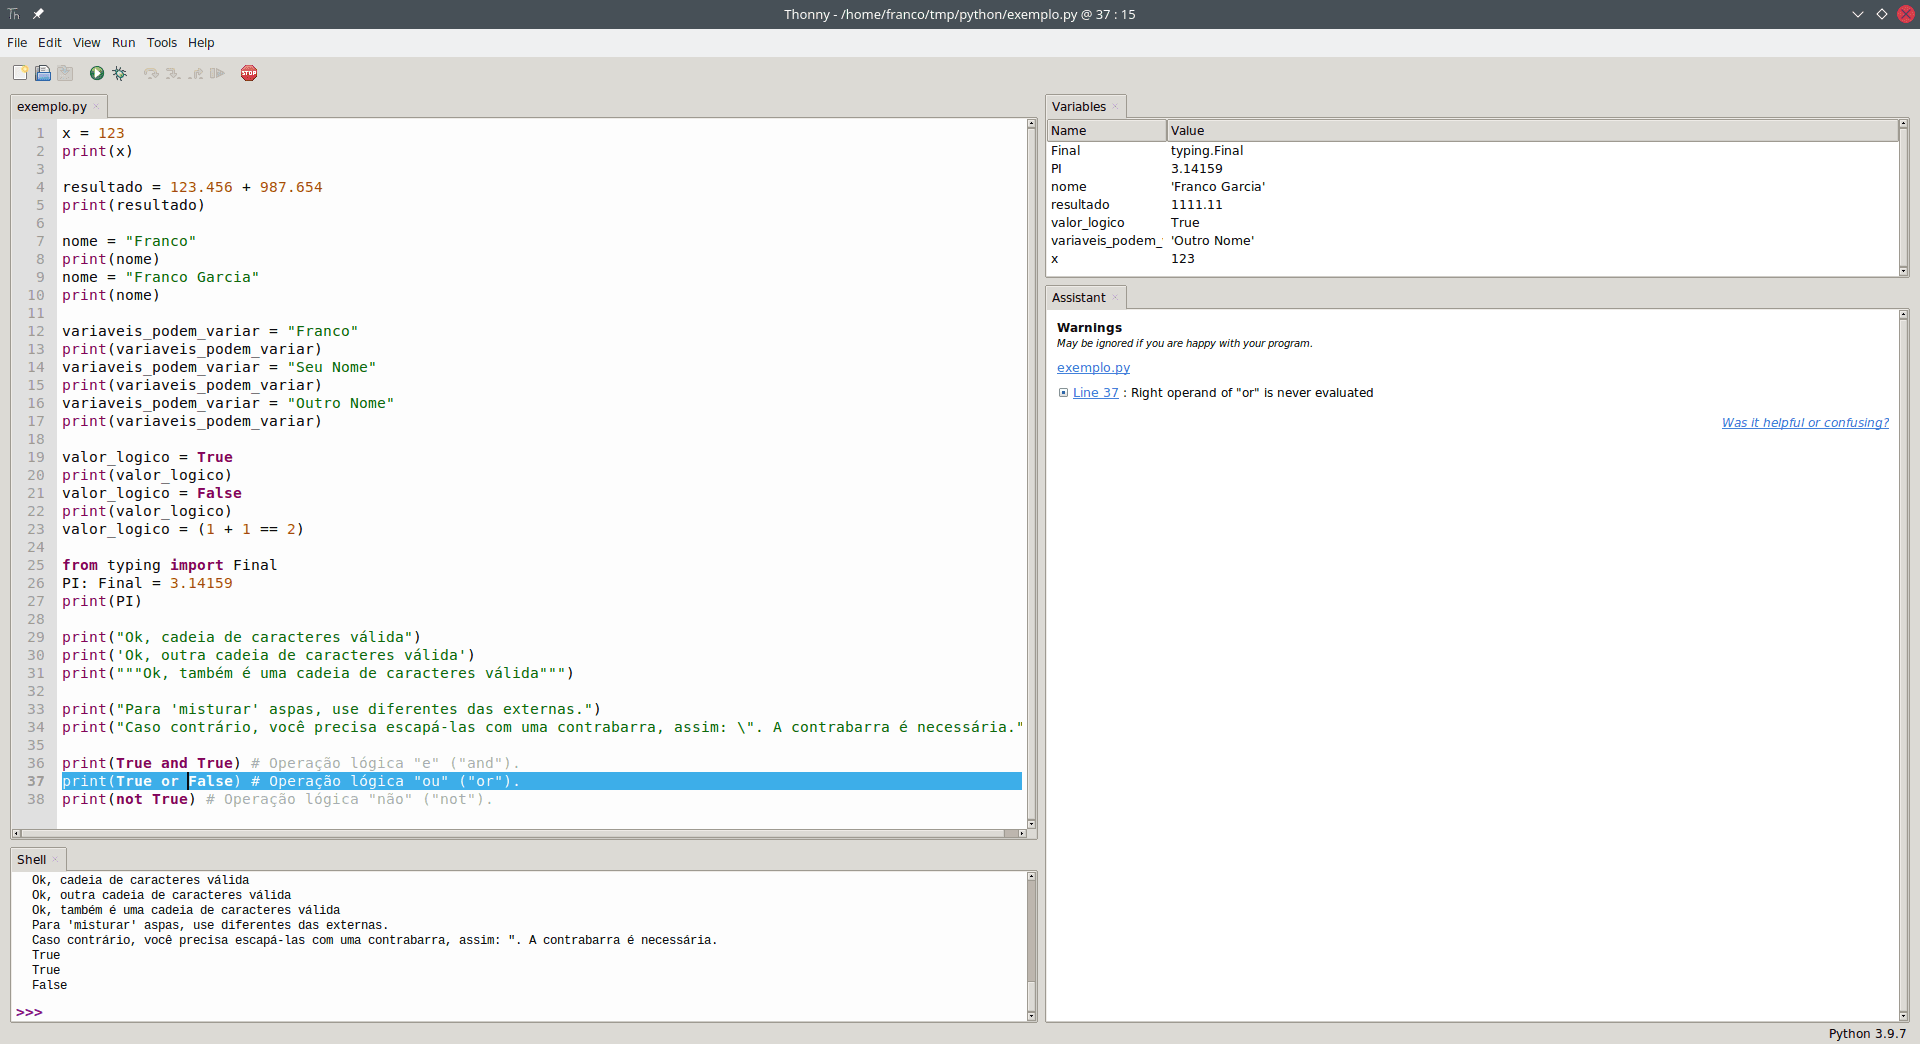 An image of Thonny, an IDE for programming in Python, with examples of the source code snippets presented in the article written in the text editor and their results on the shell.